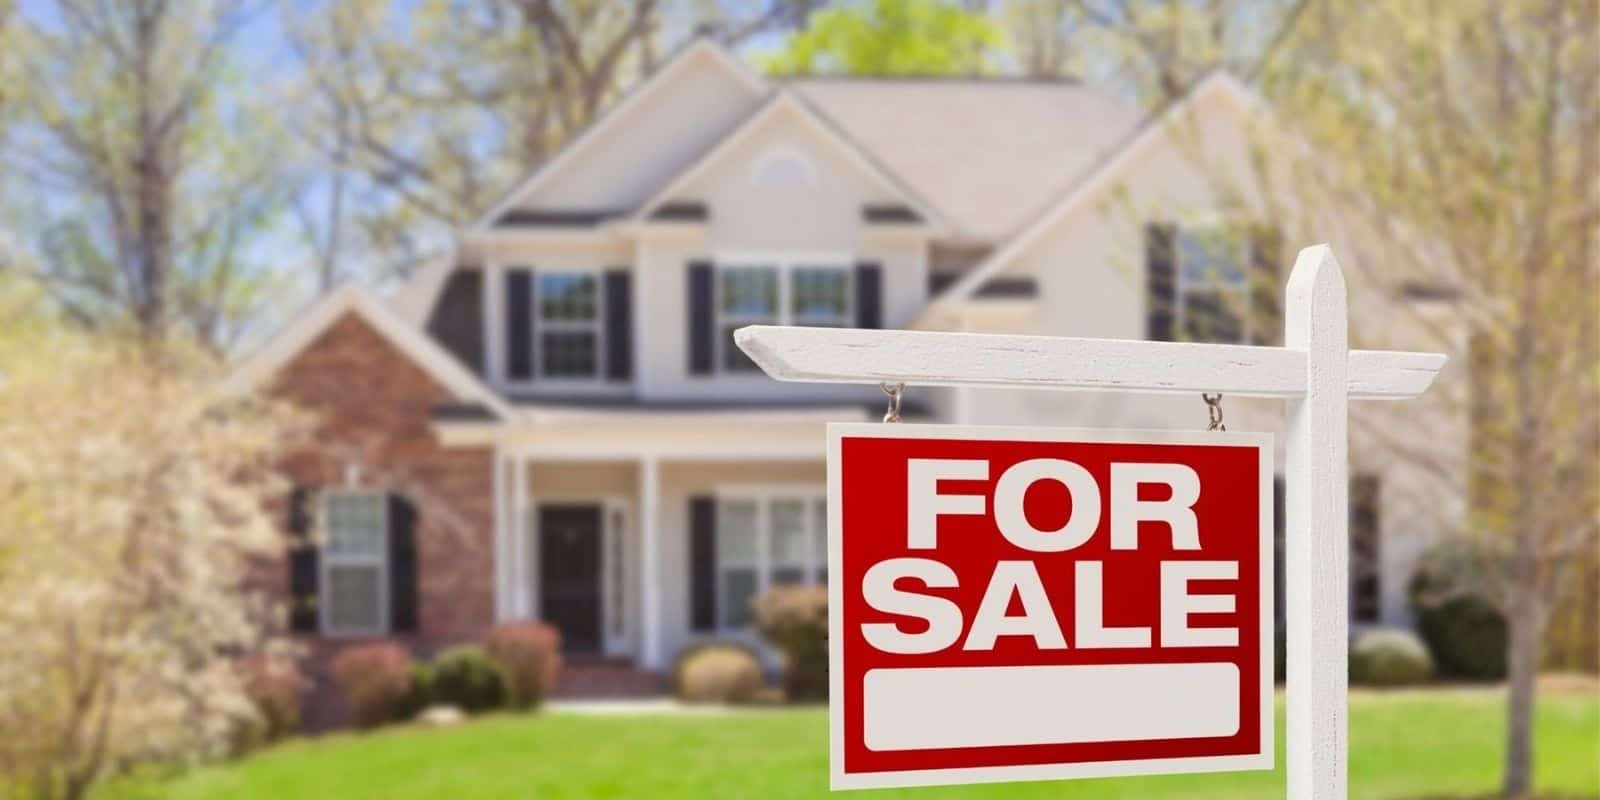 Real Estate Agent vs. FSBO: How Should You Sell Your Ocala Property?